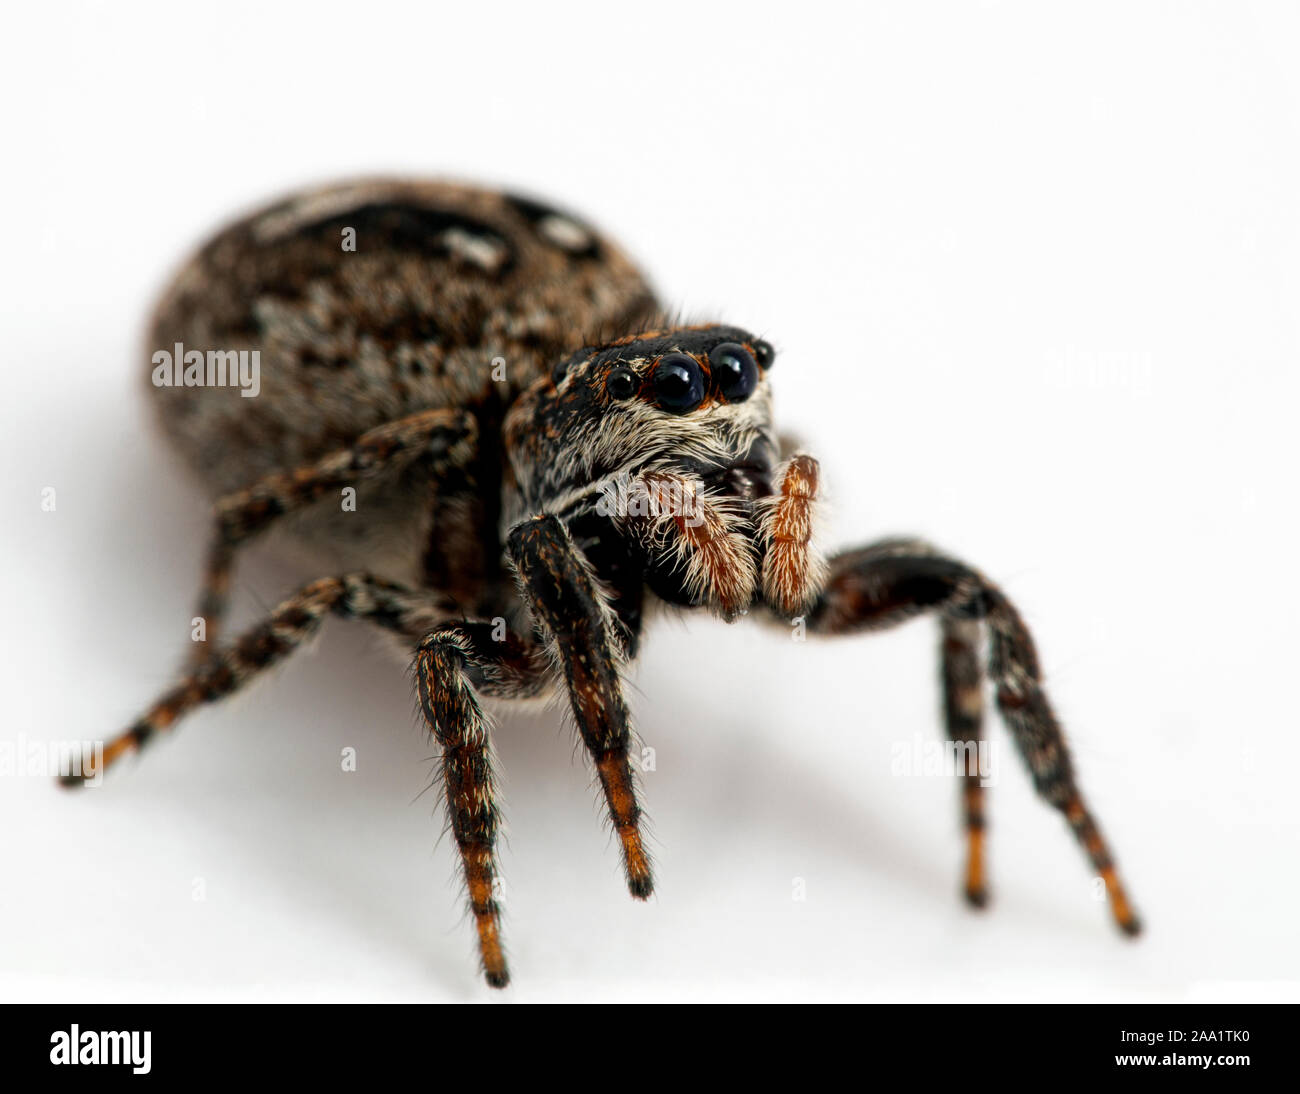 gravid female jumping spider, Calositticus floricola palustris, close-up 3/4 view, isolated Stock Photo